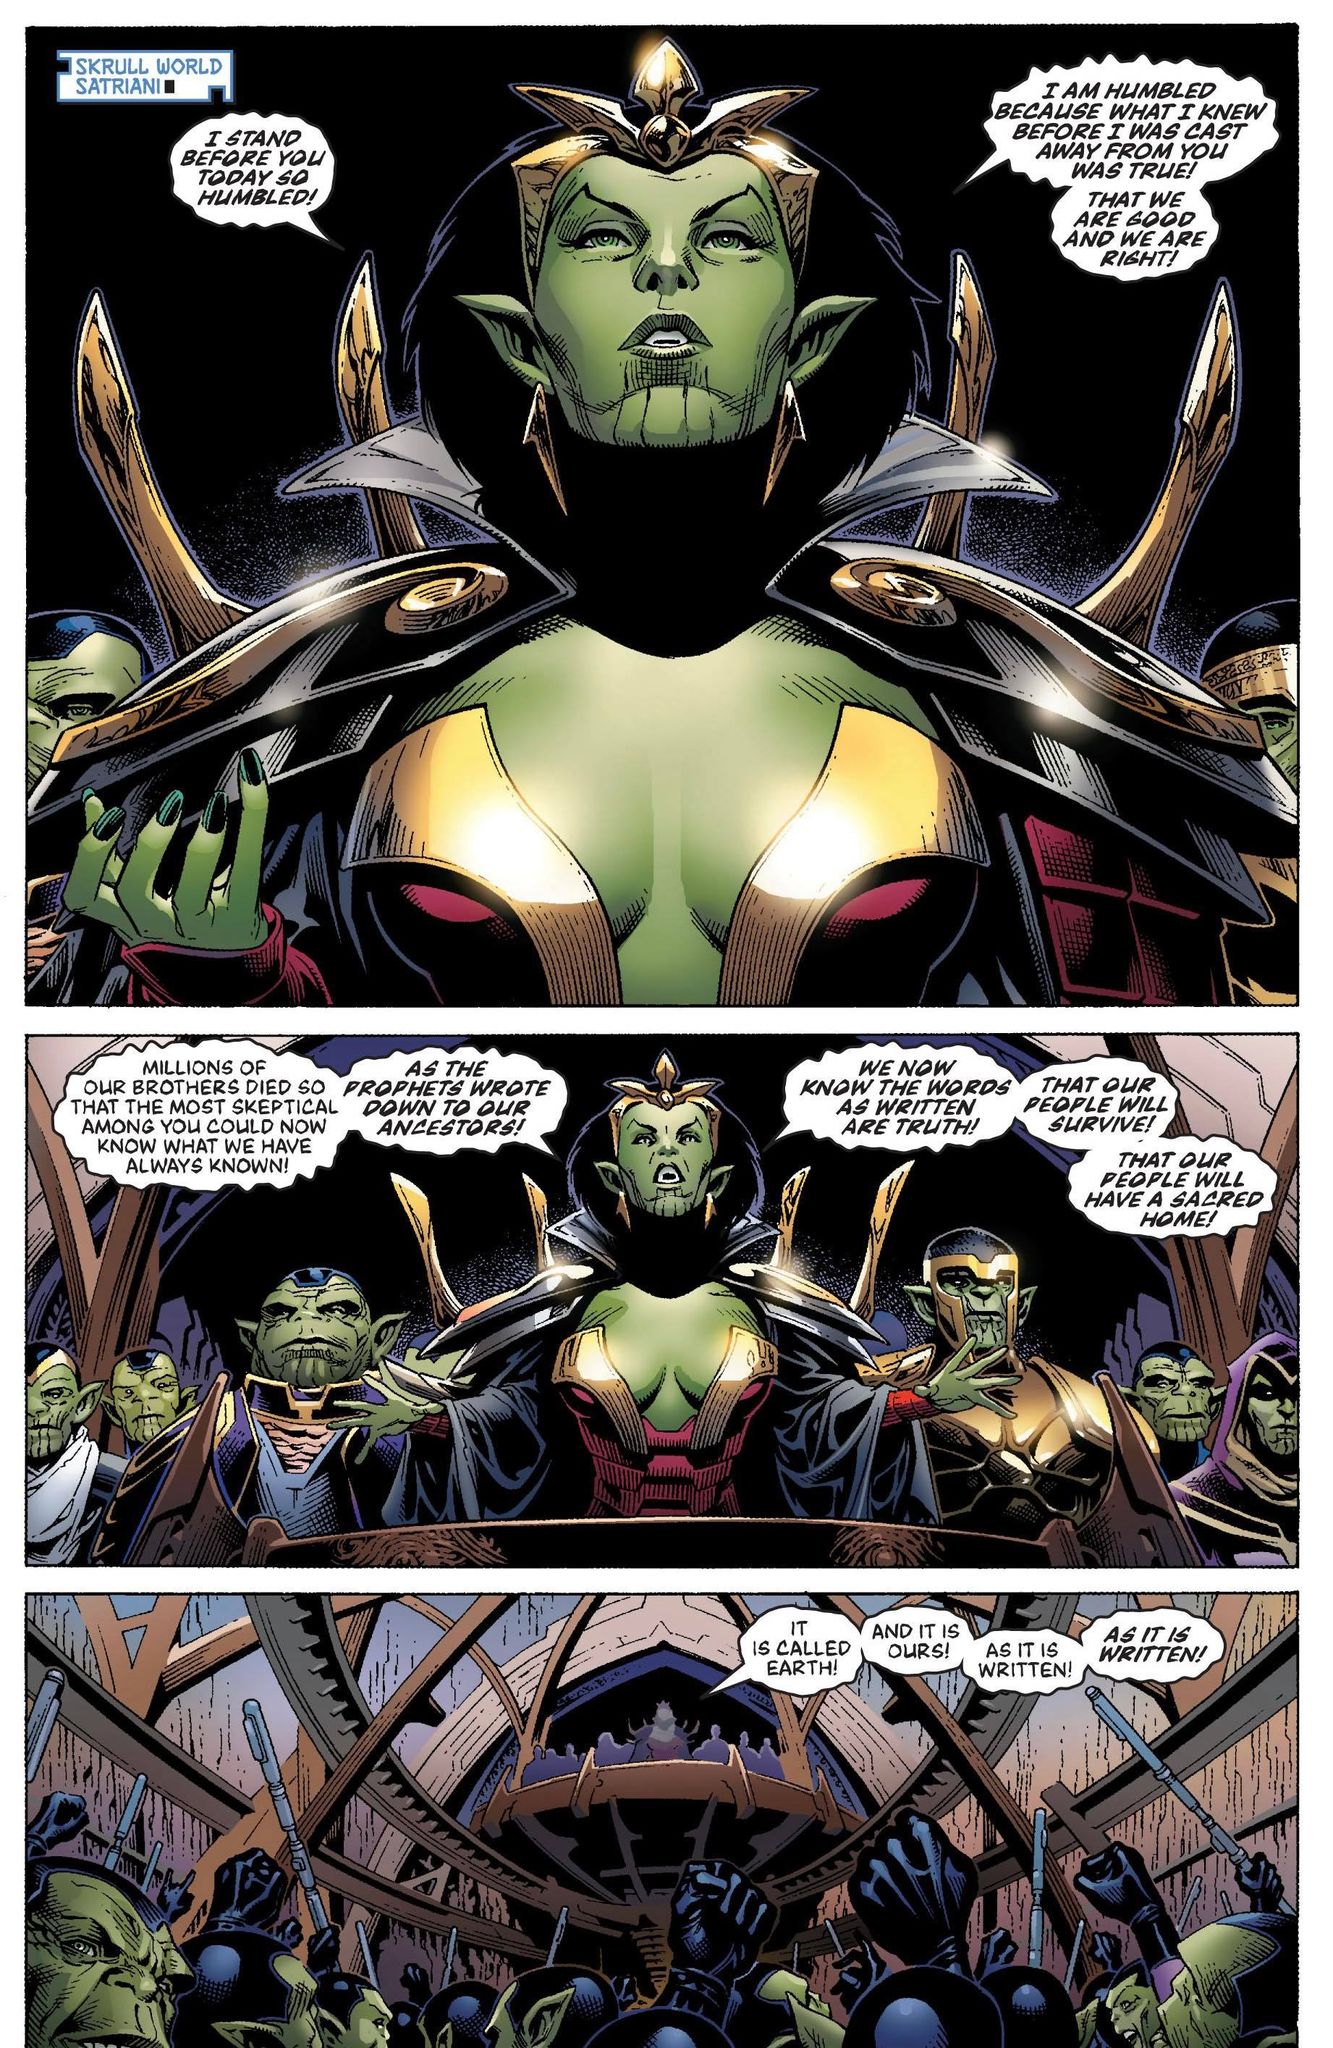 Queen Veranke plans the Secret Invasion, as seen in New Avengers #40 (2008) penciled by Jim Cheung